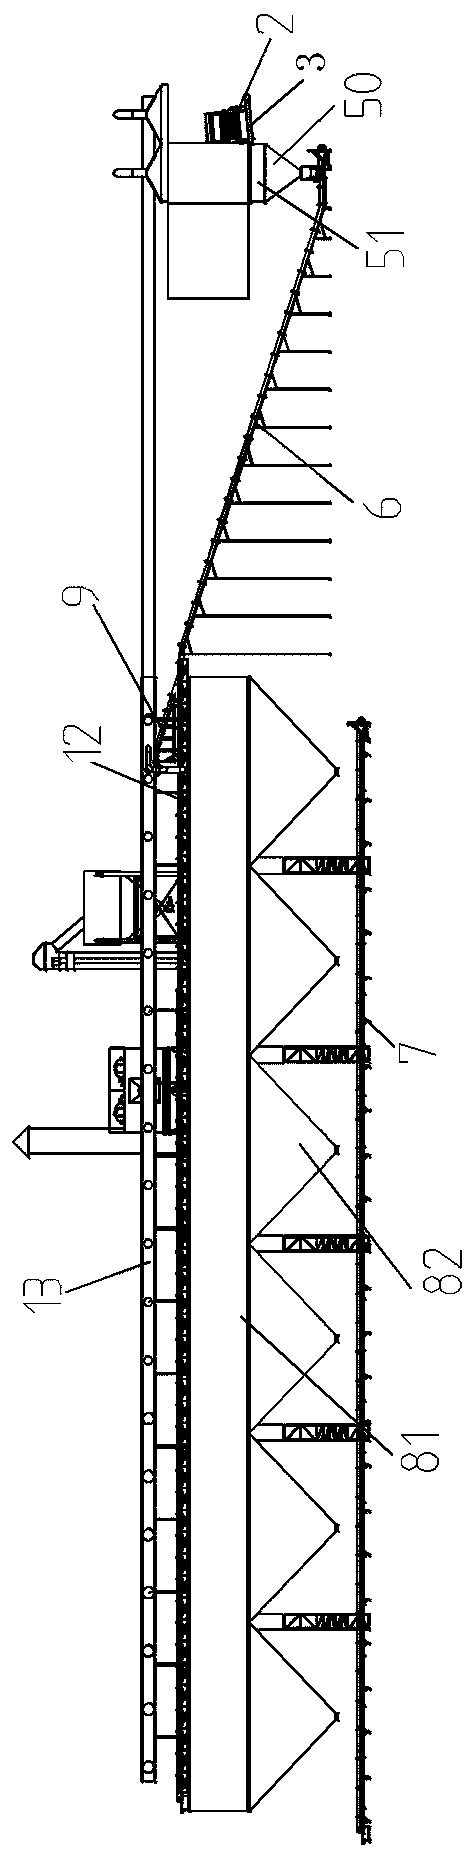 Material conveying system